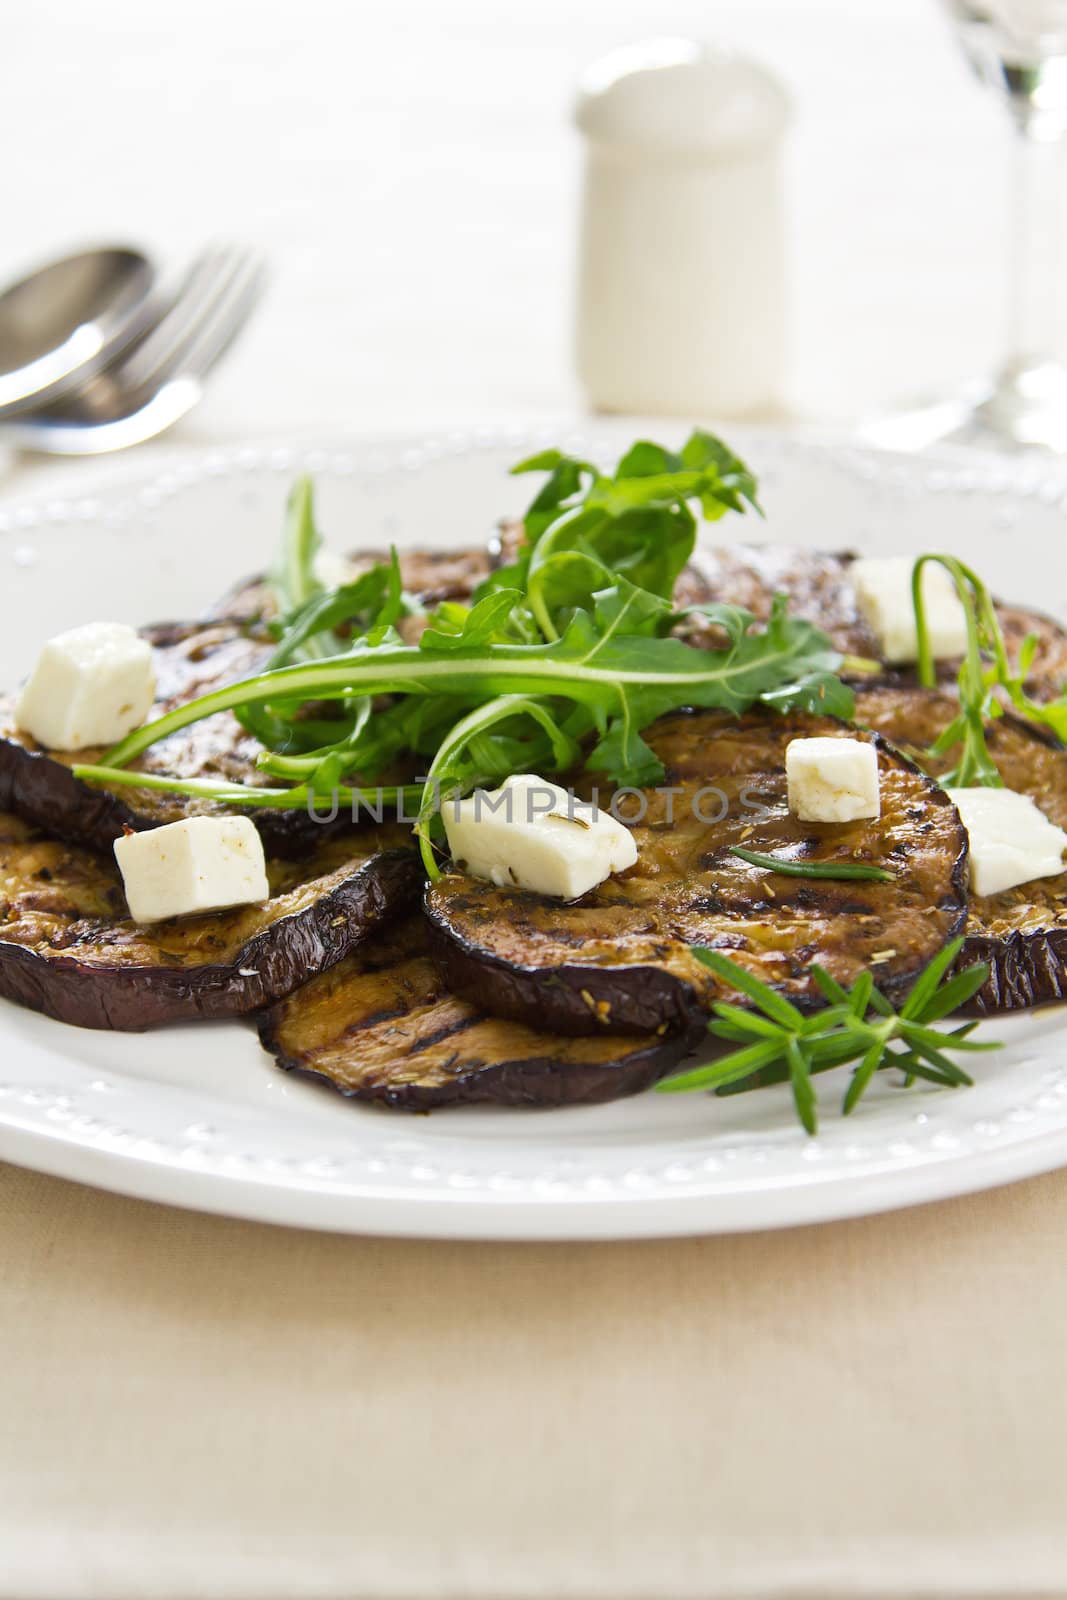 Grilled Aubergine with Feta cheese and Rocket salad